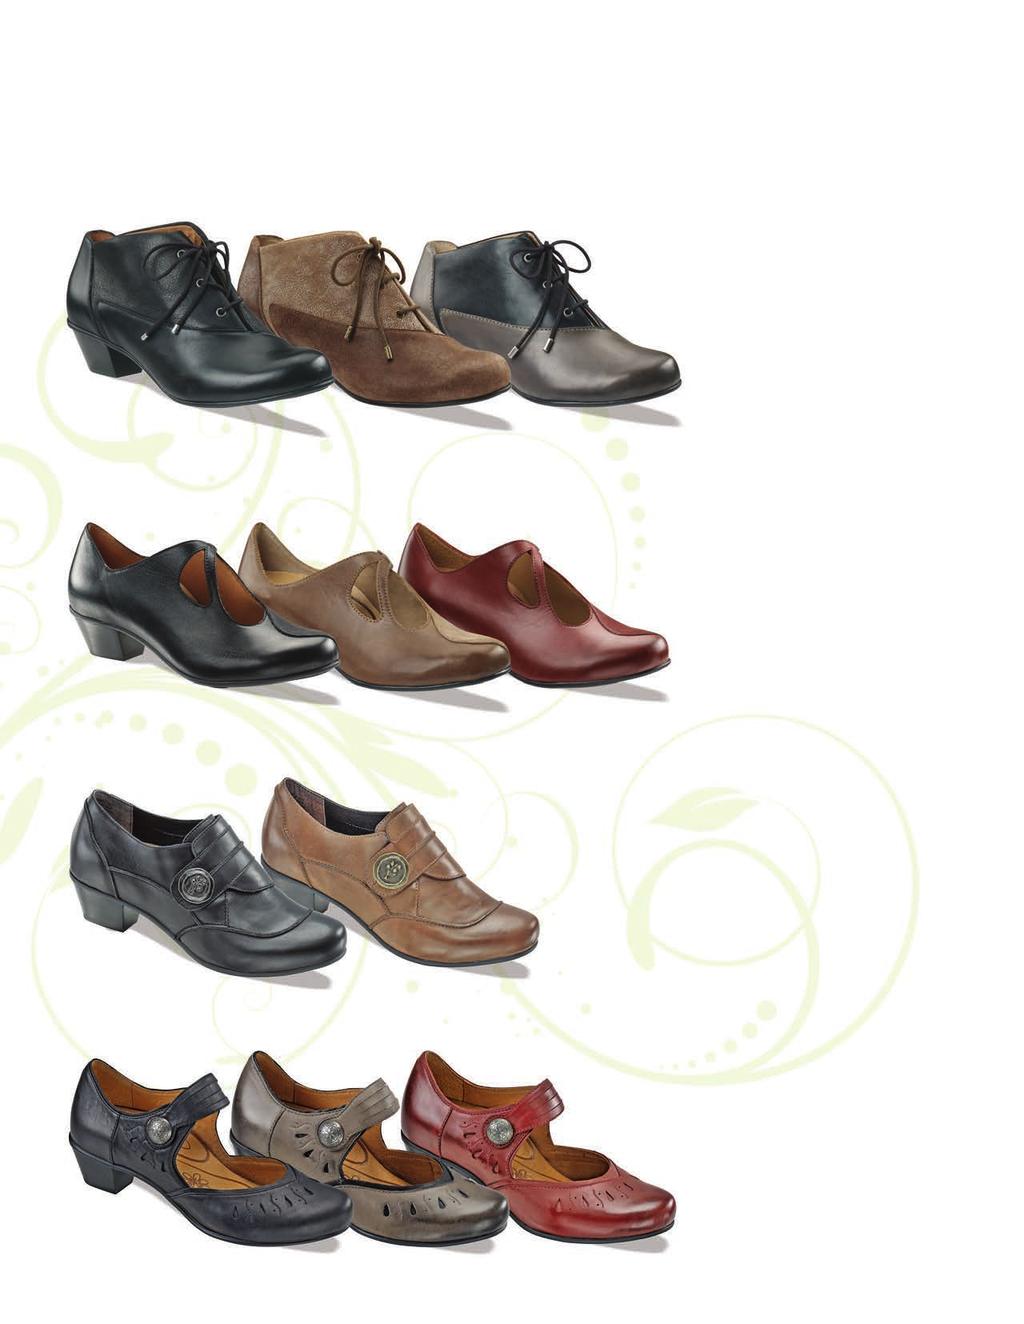 LEAH - Lace up shoetie - Color blocking and material blocking Euro Sizing - 35-42 (whole sizes only) EE500 BLACK EE502 BROWN MIX EE507 GREY/BLACK LEANNE - Asymmetrical slip-on - Bungee button closure